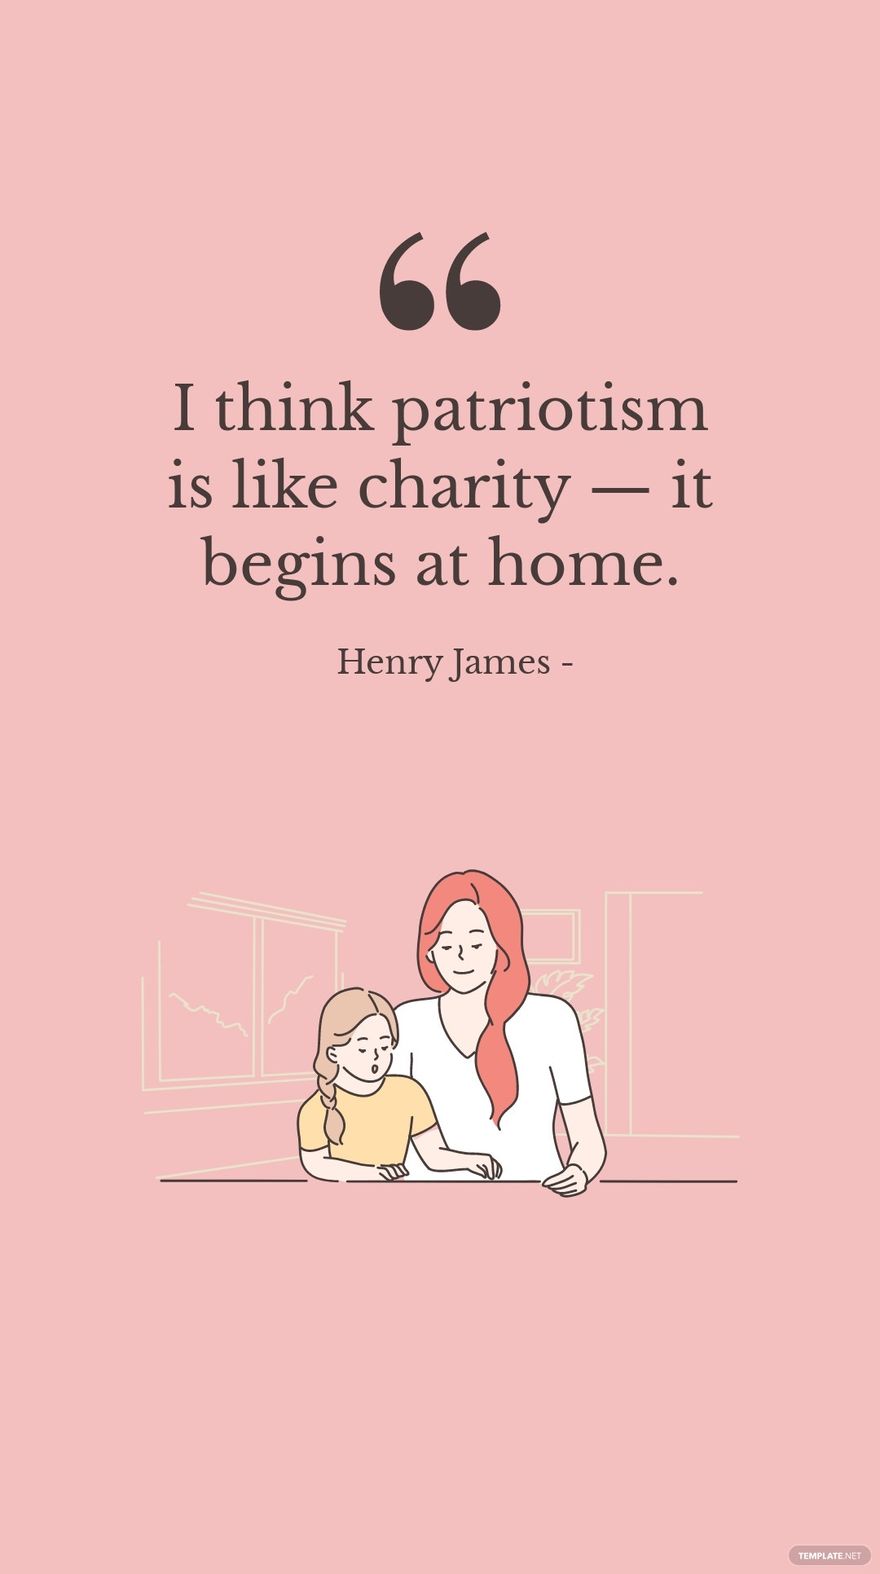 Henry James - I think patriotism is like charity — it begins at home.